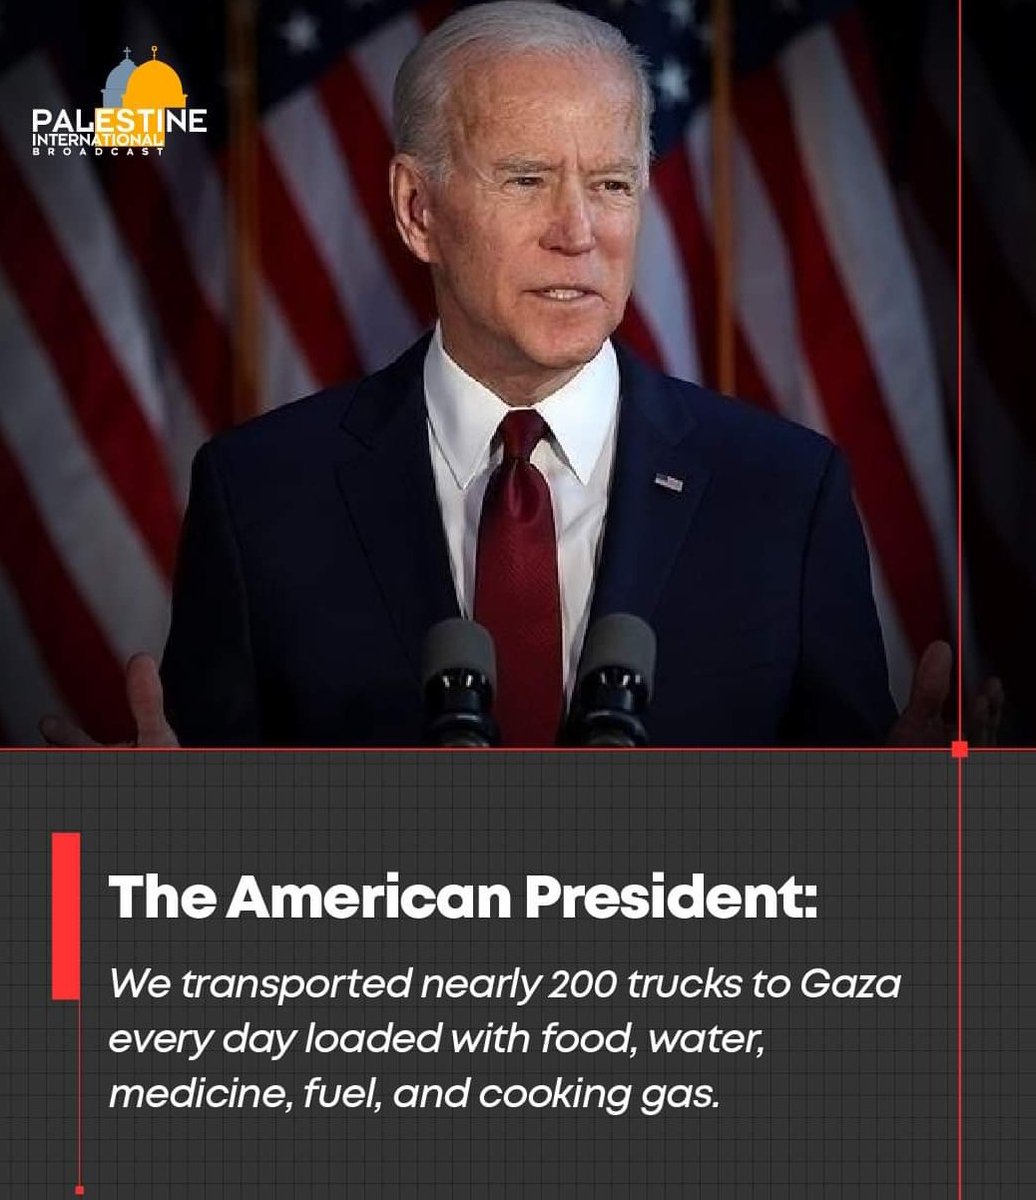 The American President: We transported nearly 200 trucks to Gaza every day loaded with food, water, medicine, fuel, and cooking gas.
#GazaNation #GazaGenocide #palestinelivesmatter #ChildrenLivesMatter